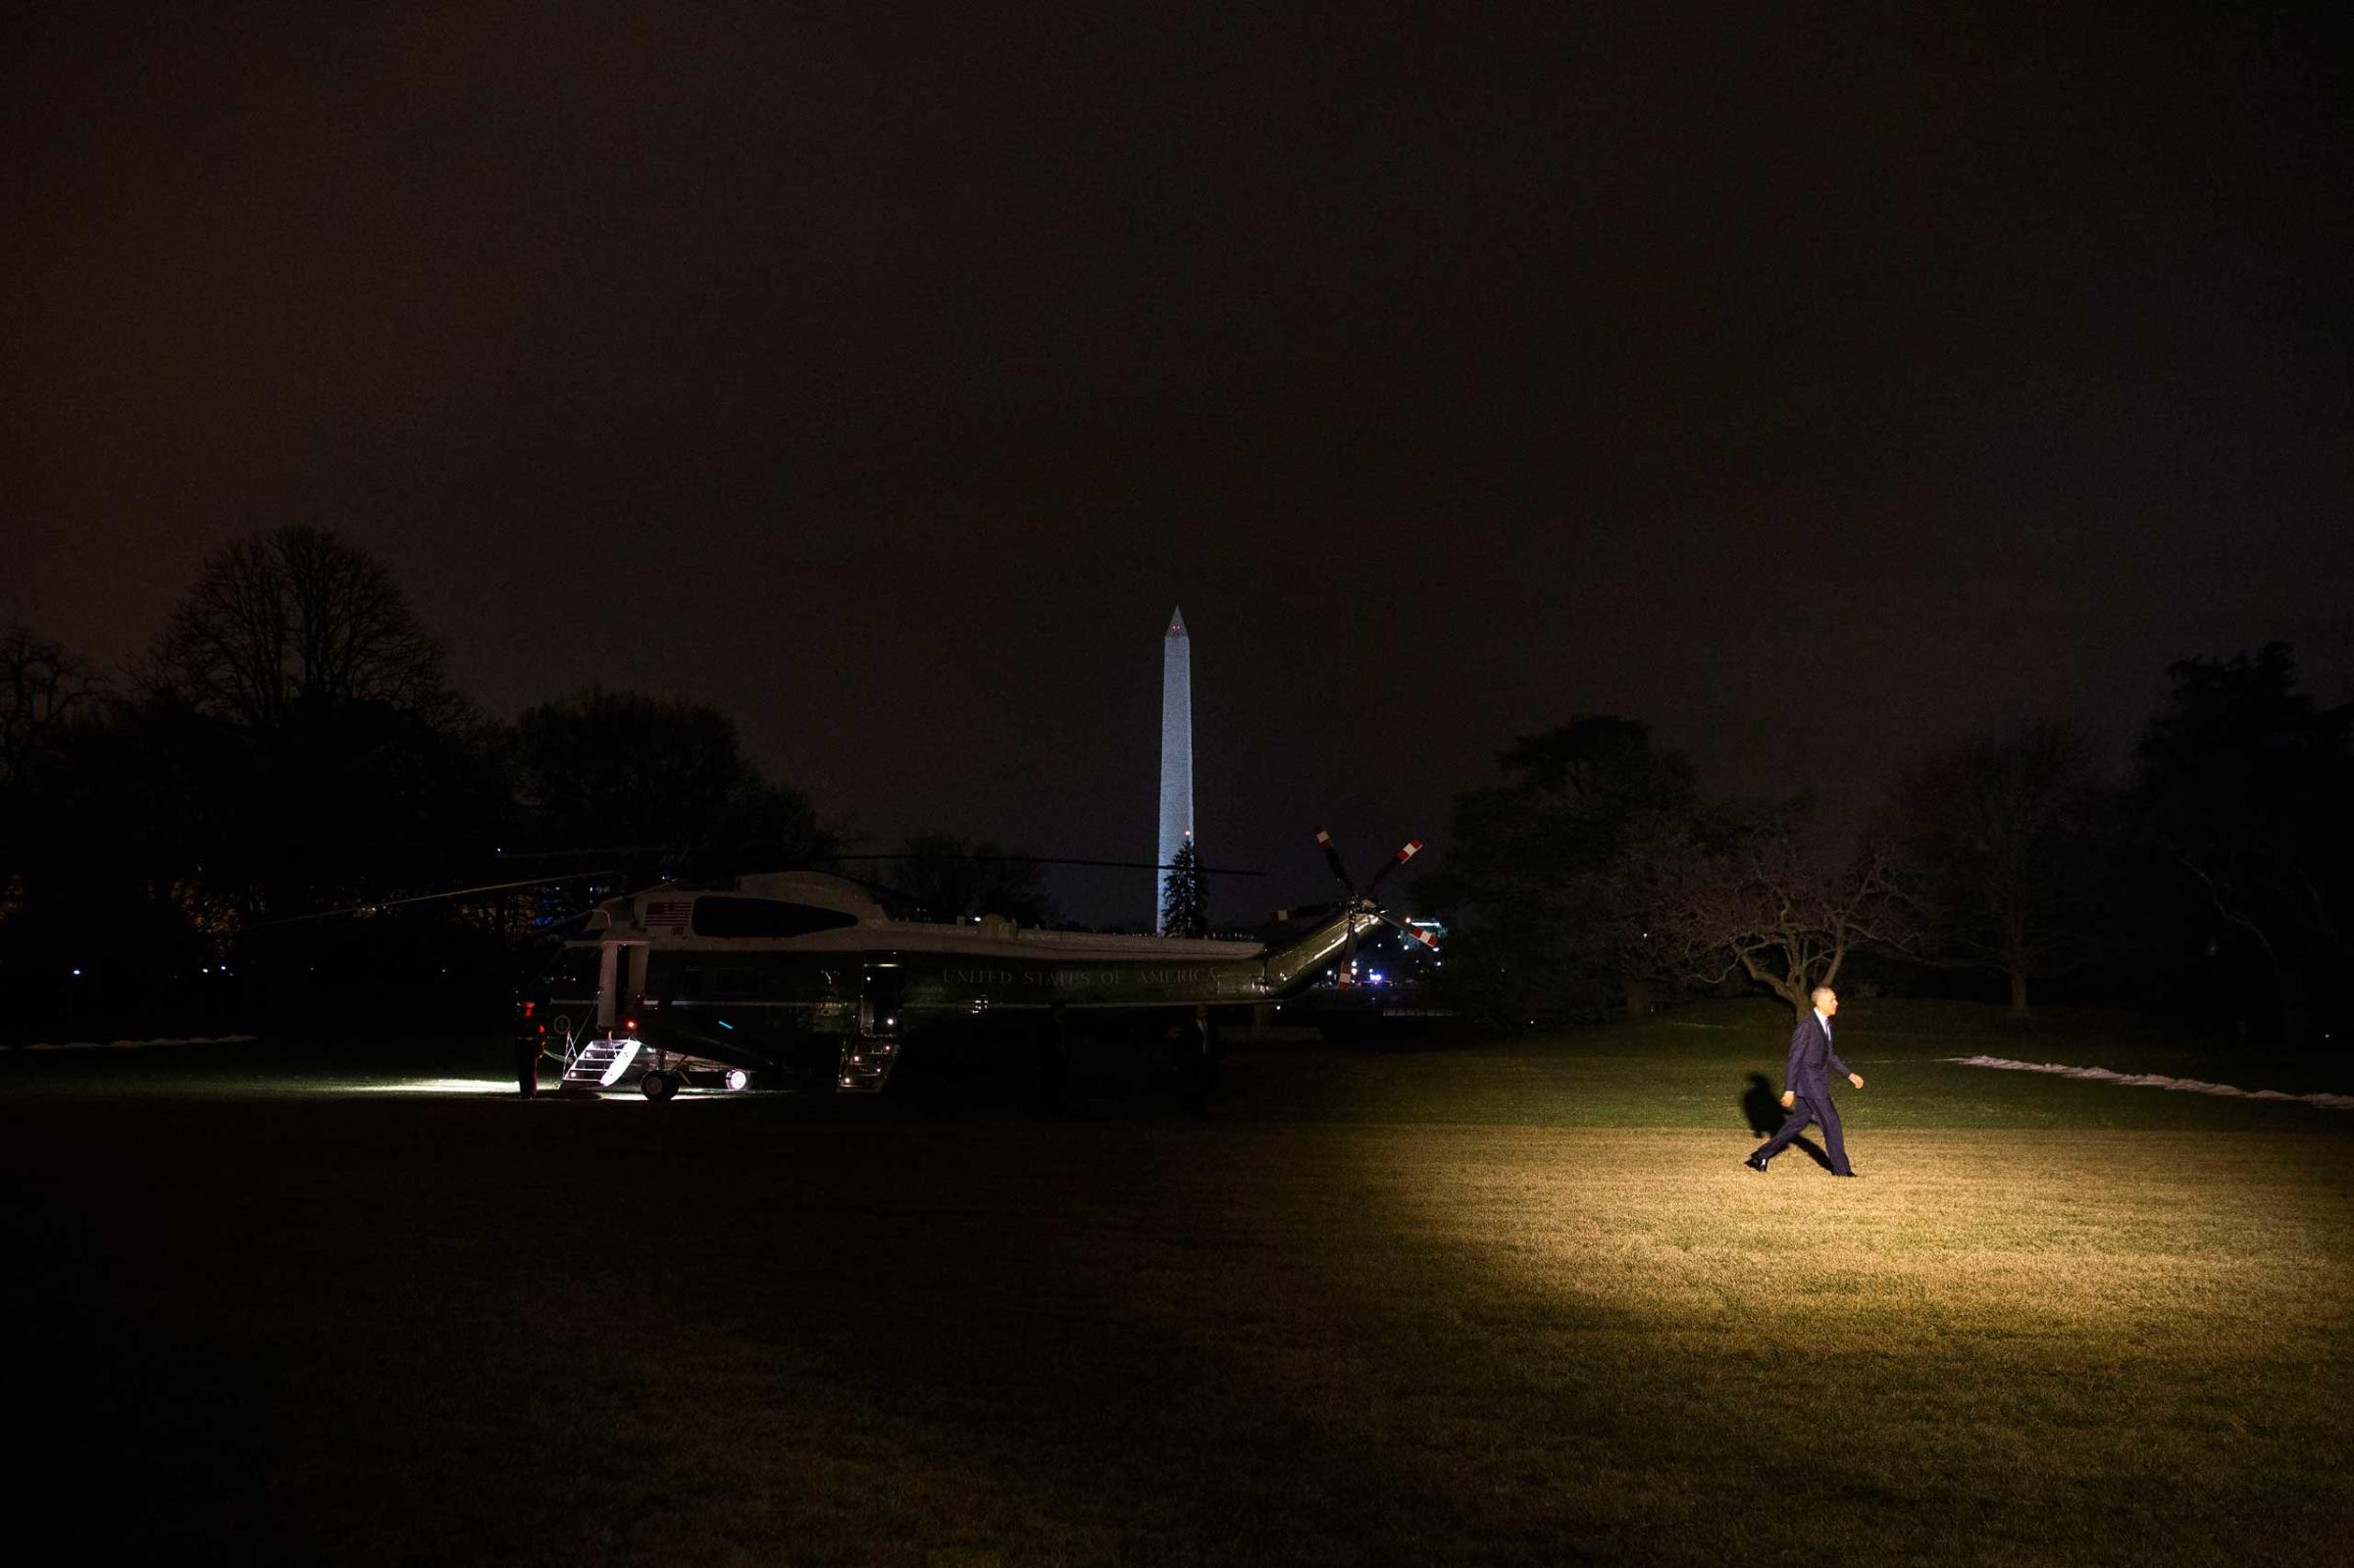 Jan. 14, 2015. President Barack Obama arrives on the South Lawn of the White House in Washington, D.C. after a day trip to Cedar Falls, Iowa to deliver a speech on increasing access to affordable high-speed broadband.